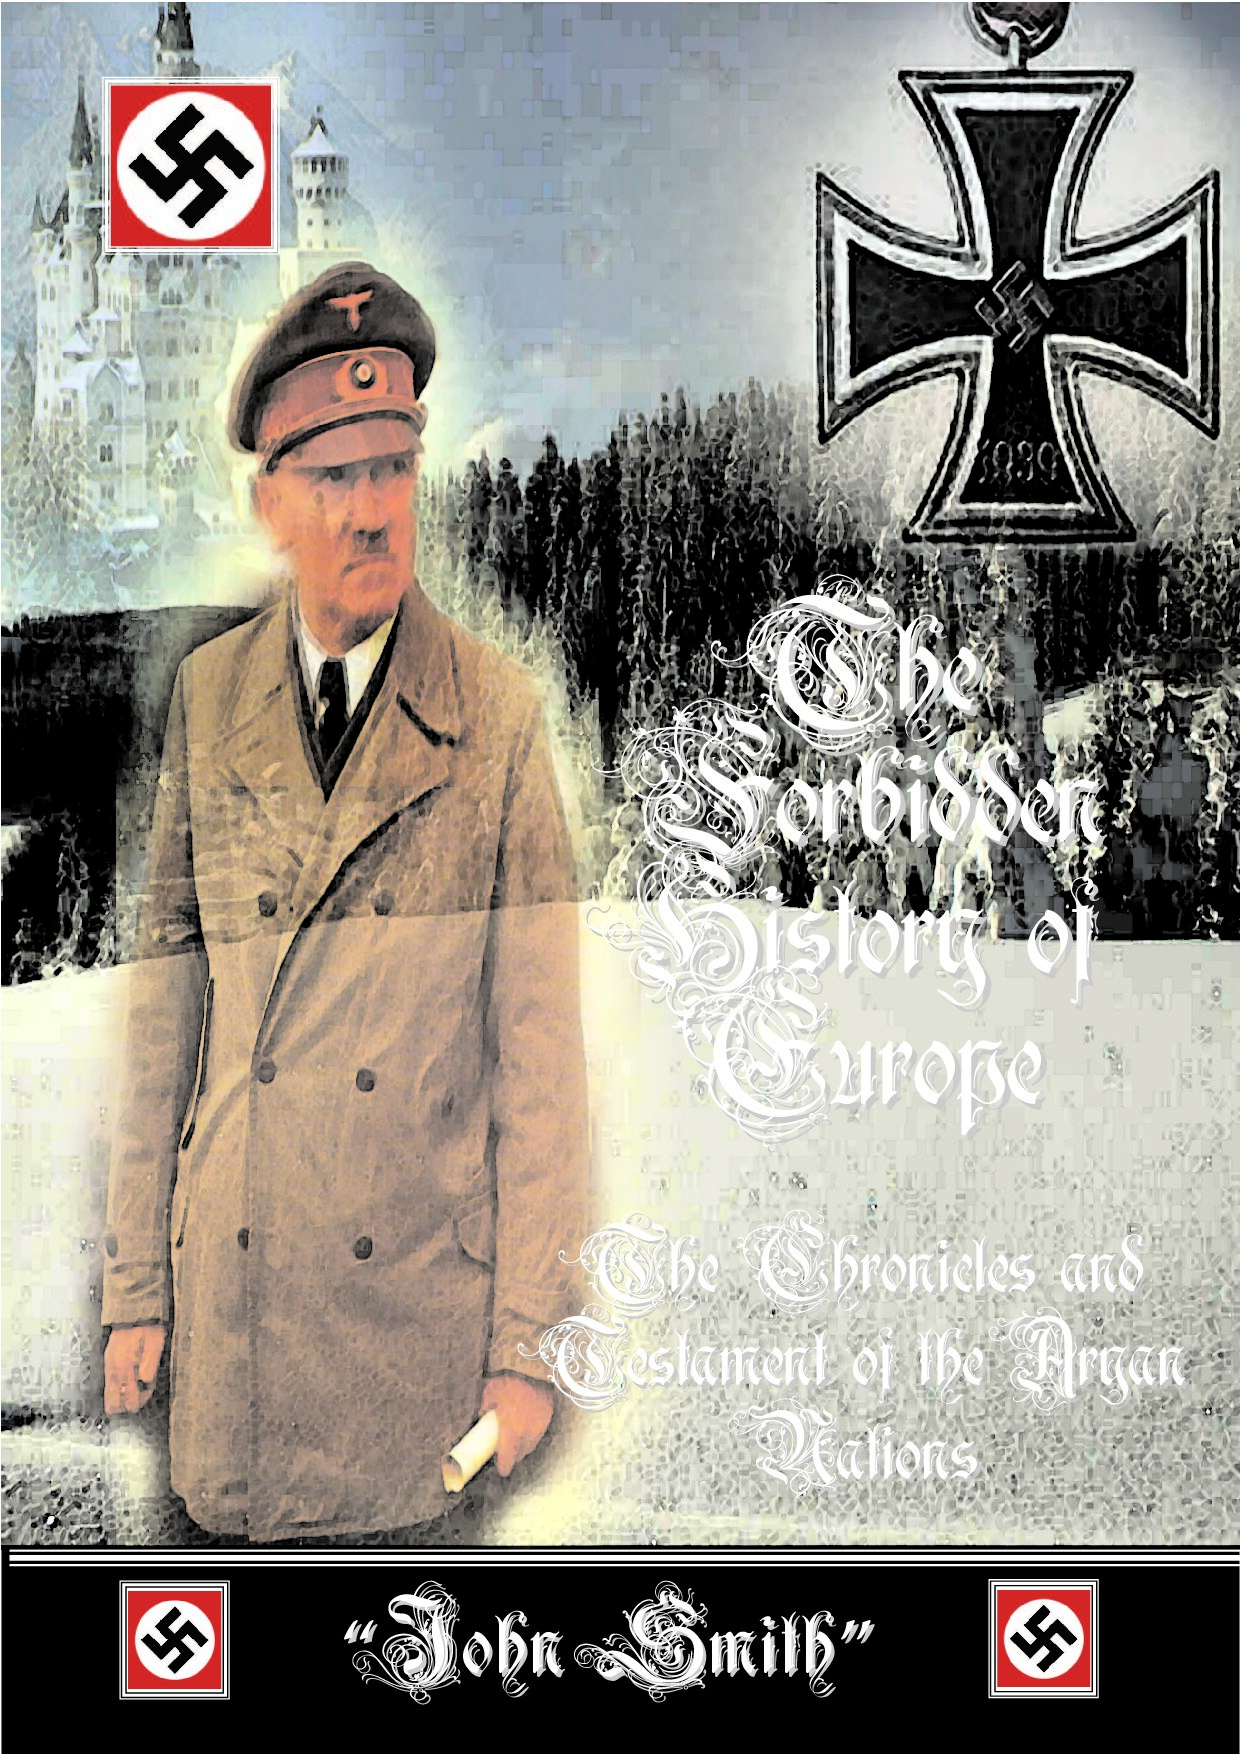 The Forbidden History of Europe: The Chronicles and Testament of the Aryan Nations